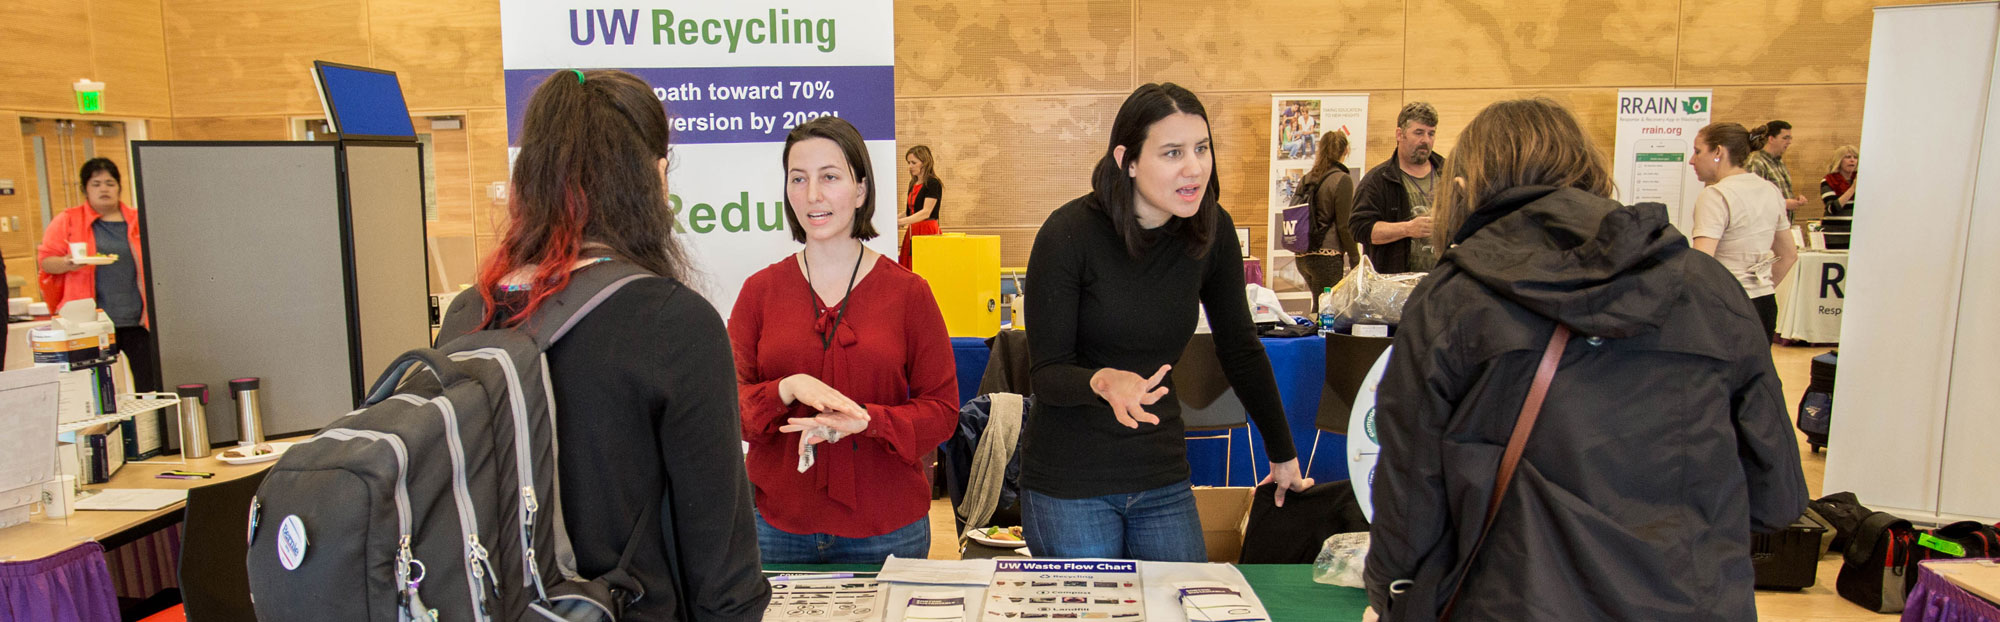 Liz Gignilliat and Erica Bartlett from UW Recycling talk with expo attendees.